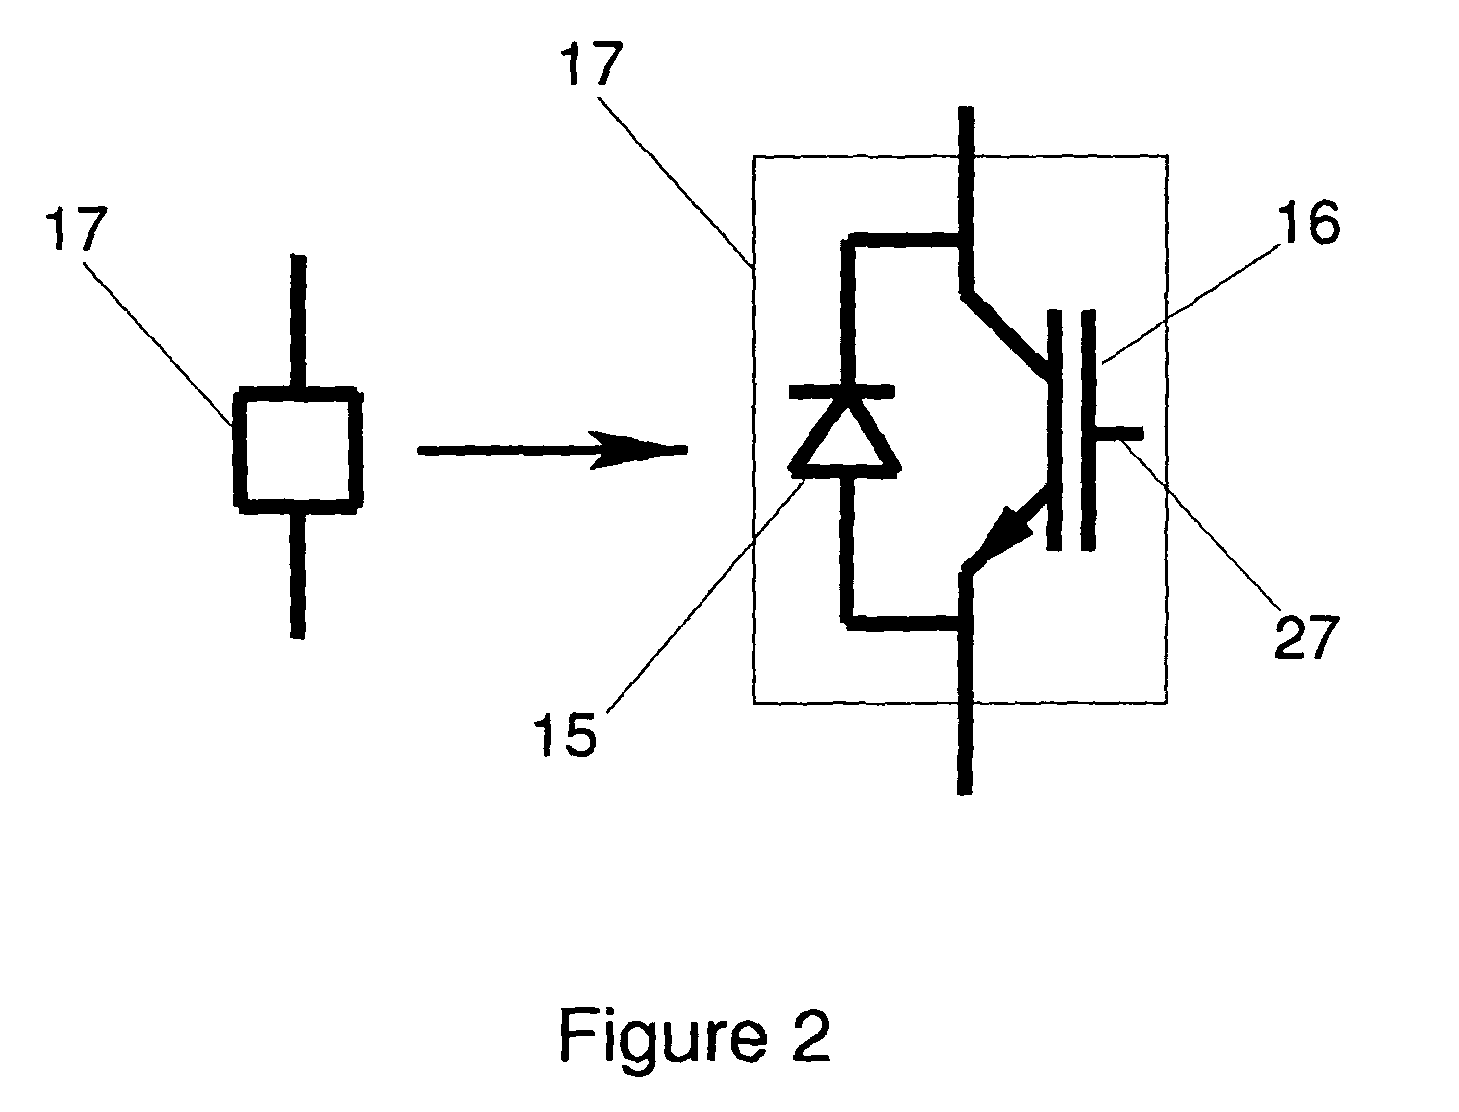 Method and apparatus for power electronics and control of plug-in hybrid propulsion with fast energy storage